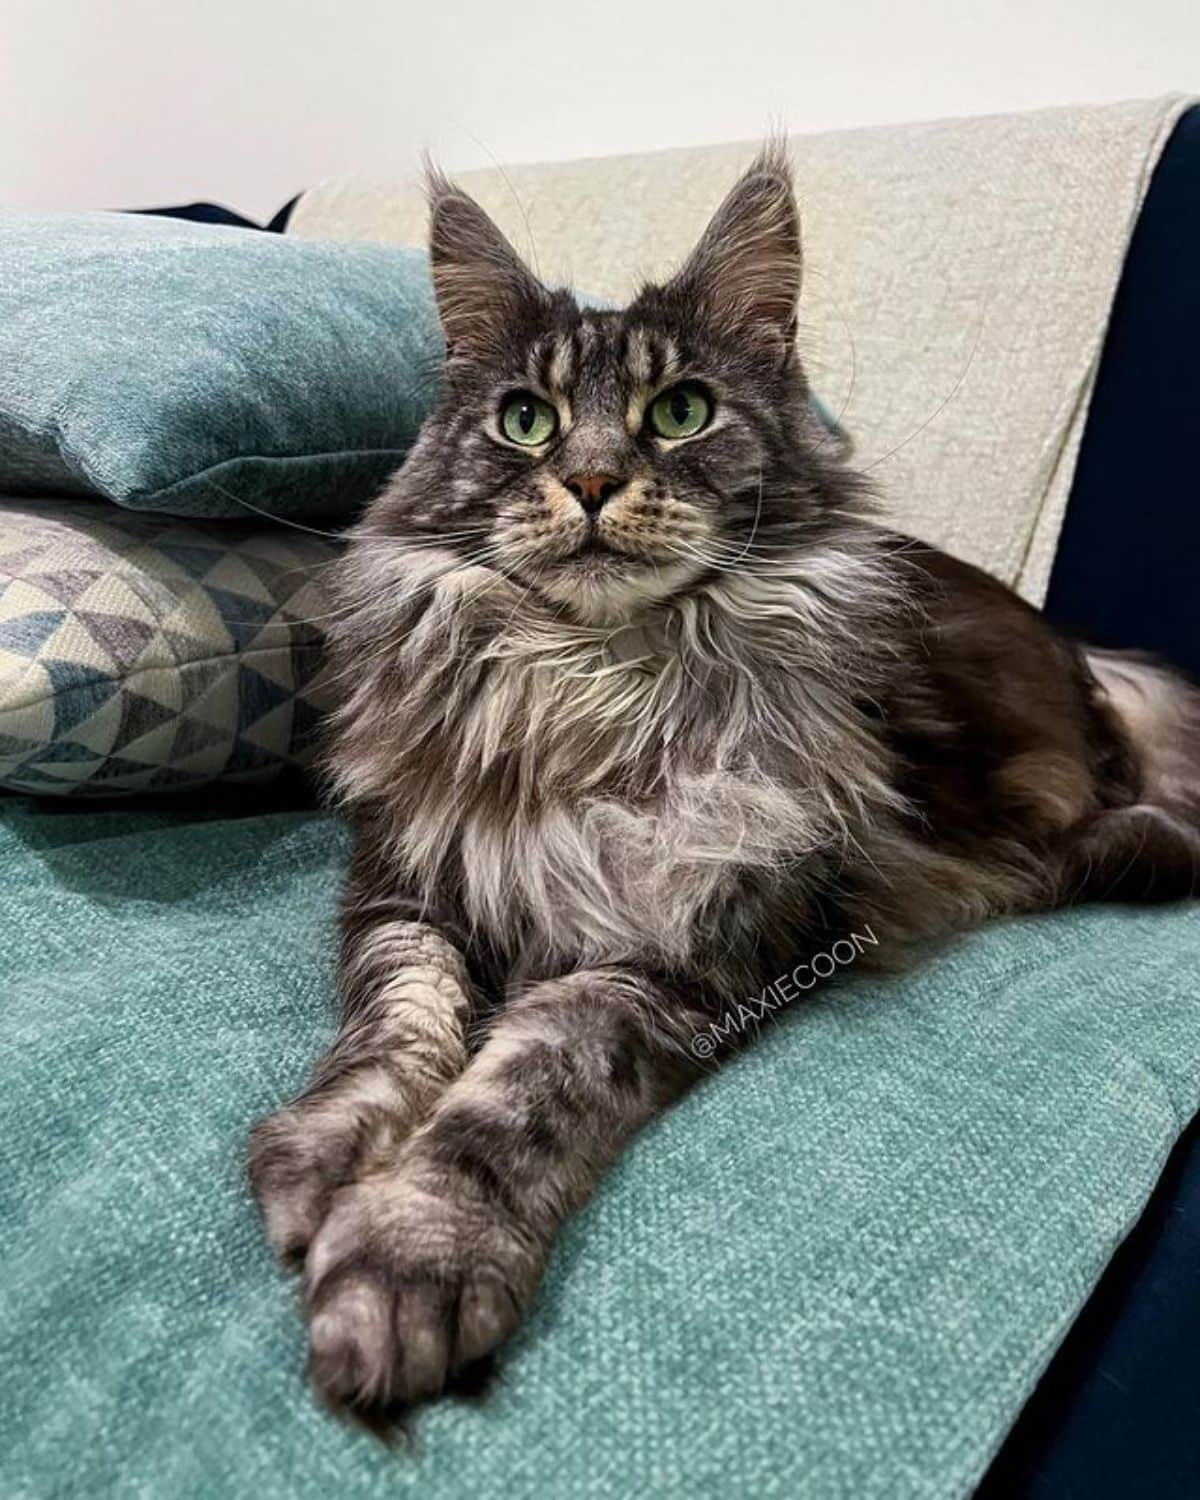 A fluffy gray maine coon lying on a couch.